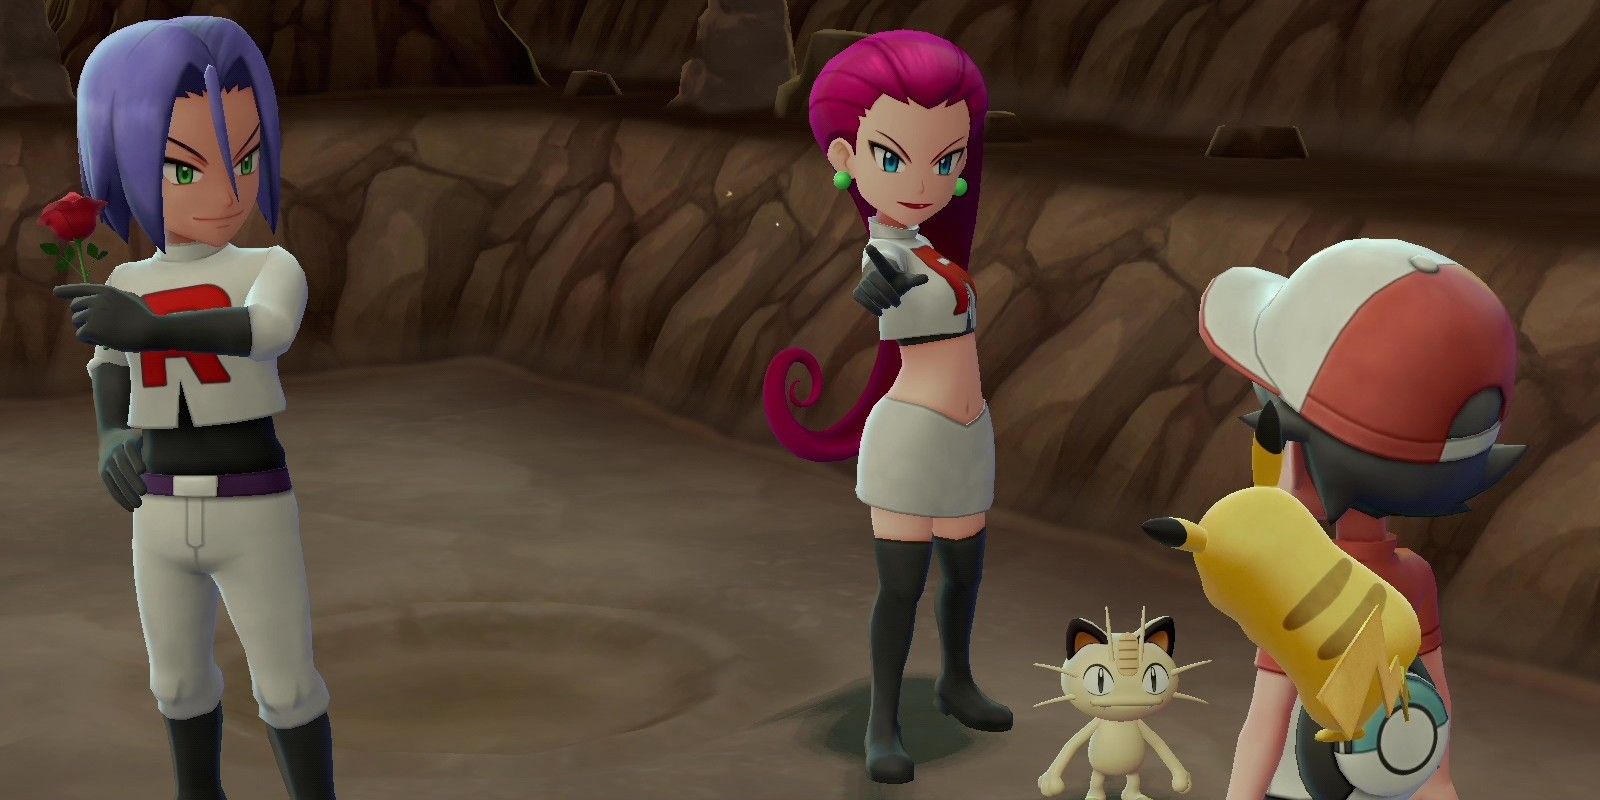 The player featured in Pokémon: Let's Go, Pikachu!  being challenged by Jessie and James from Team Rocket.